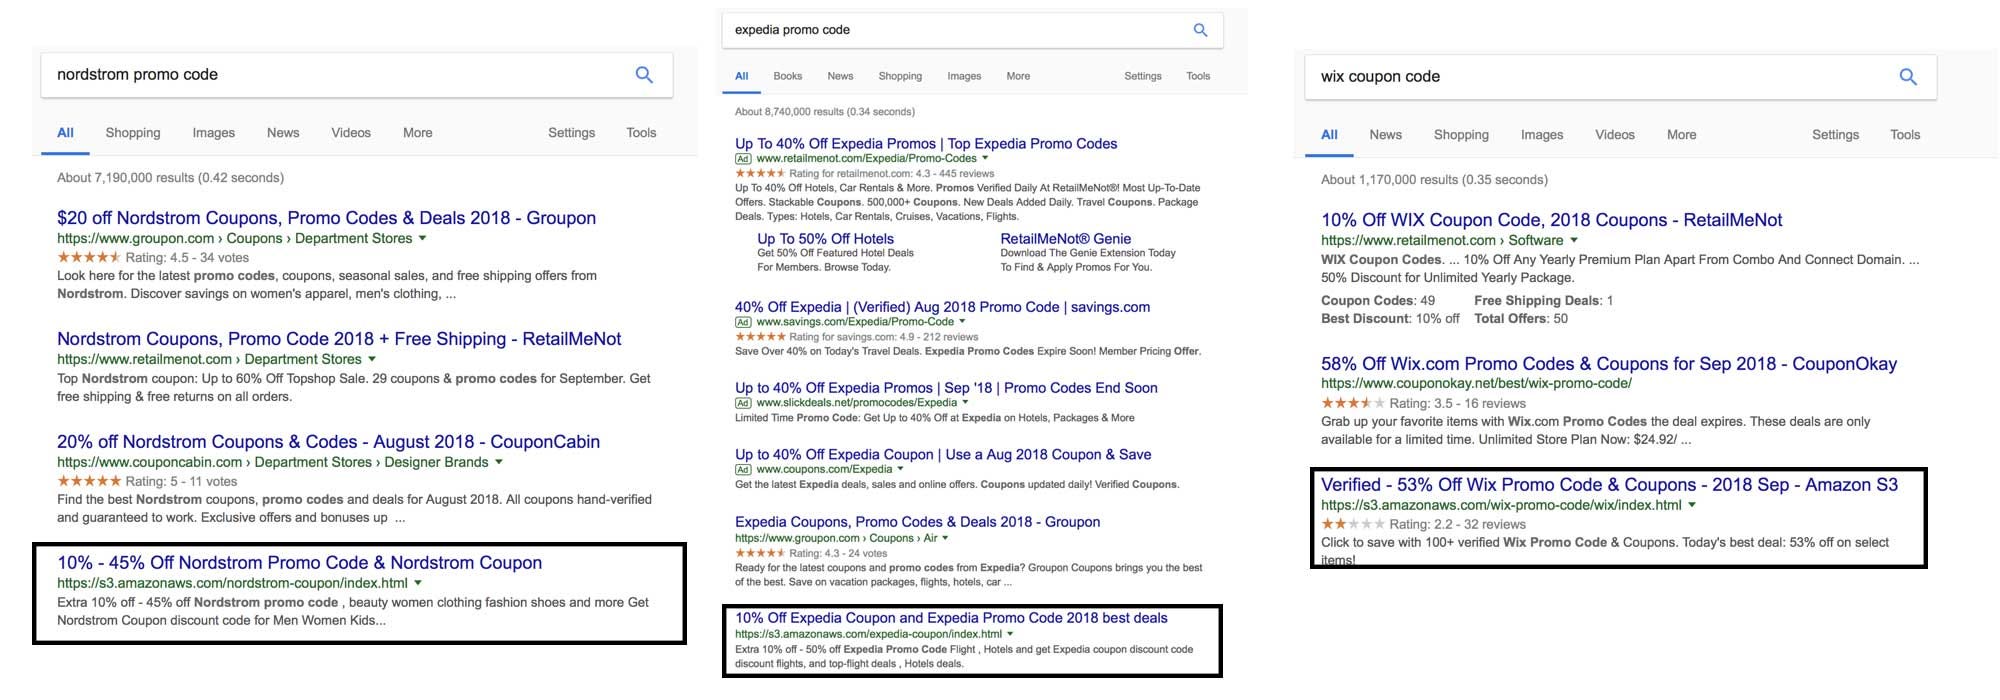 How One Website Exploited Amazon S3 To Outrank Everyone On Google Images, Photos, Reviews